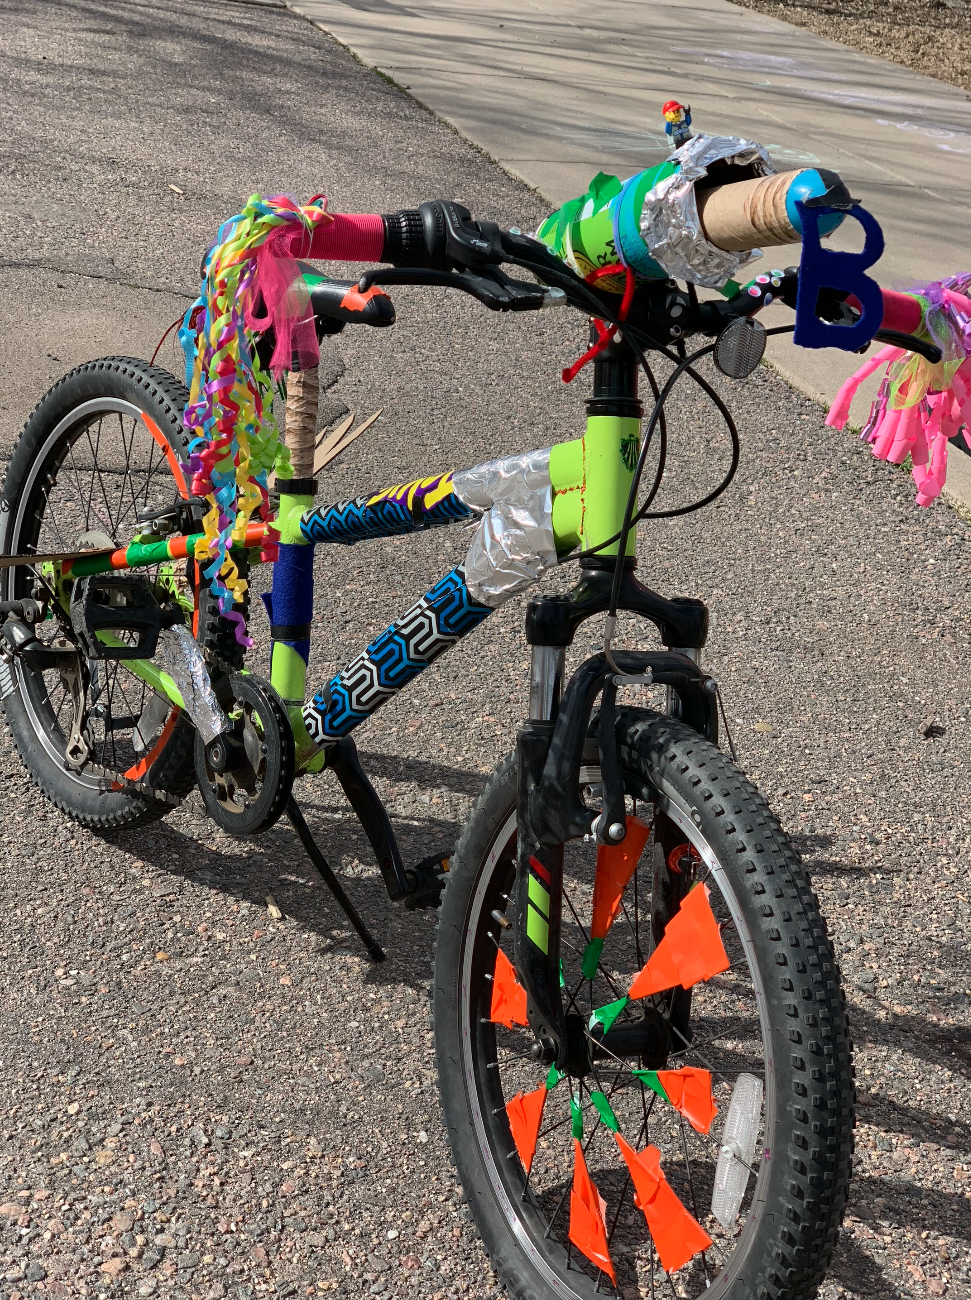 A small children's bike decorated with brightly colored streamers and tape.